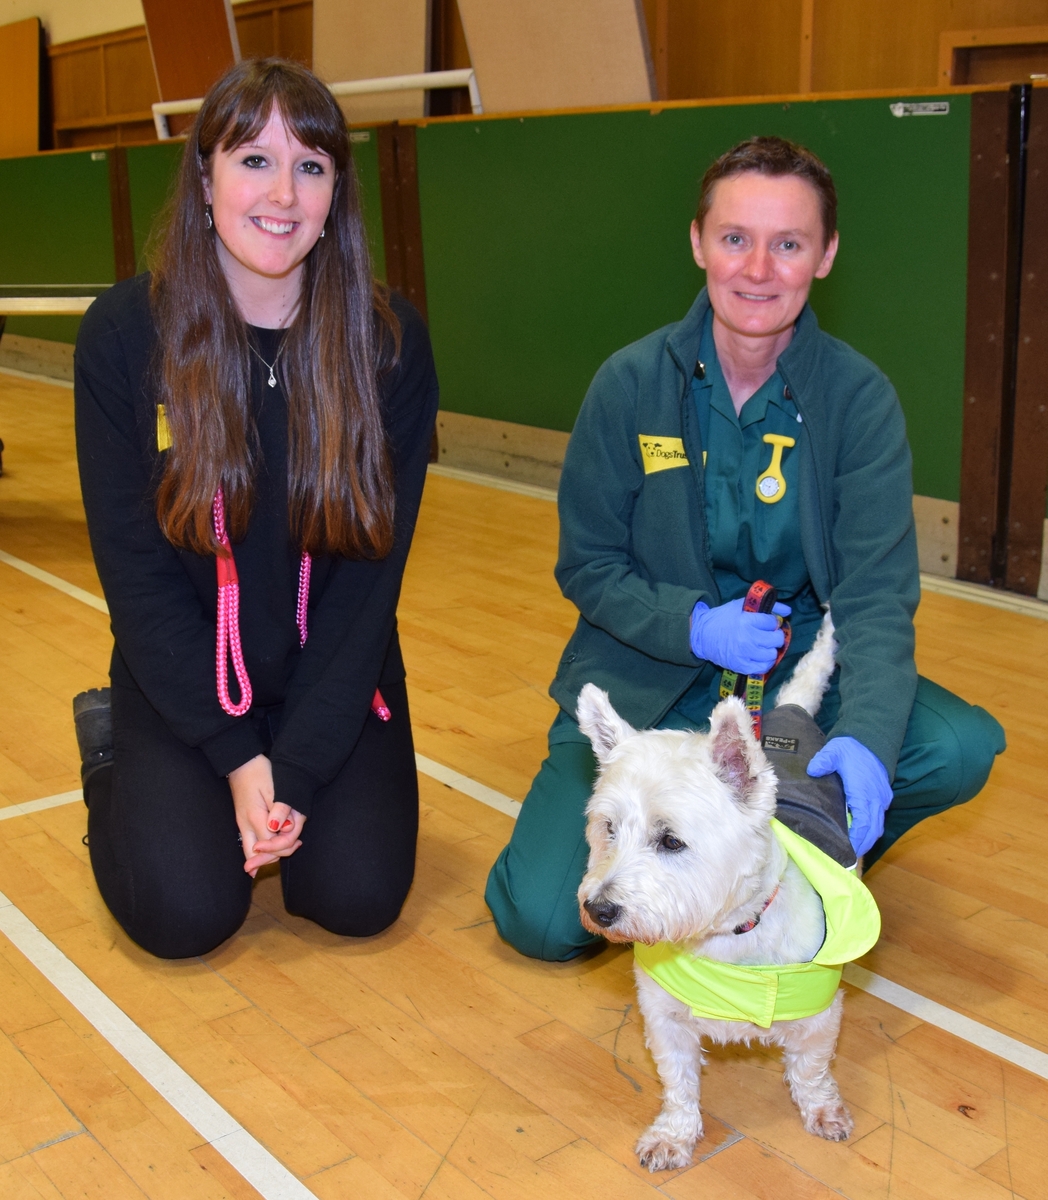 Free microchipping comes to Campbeltown